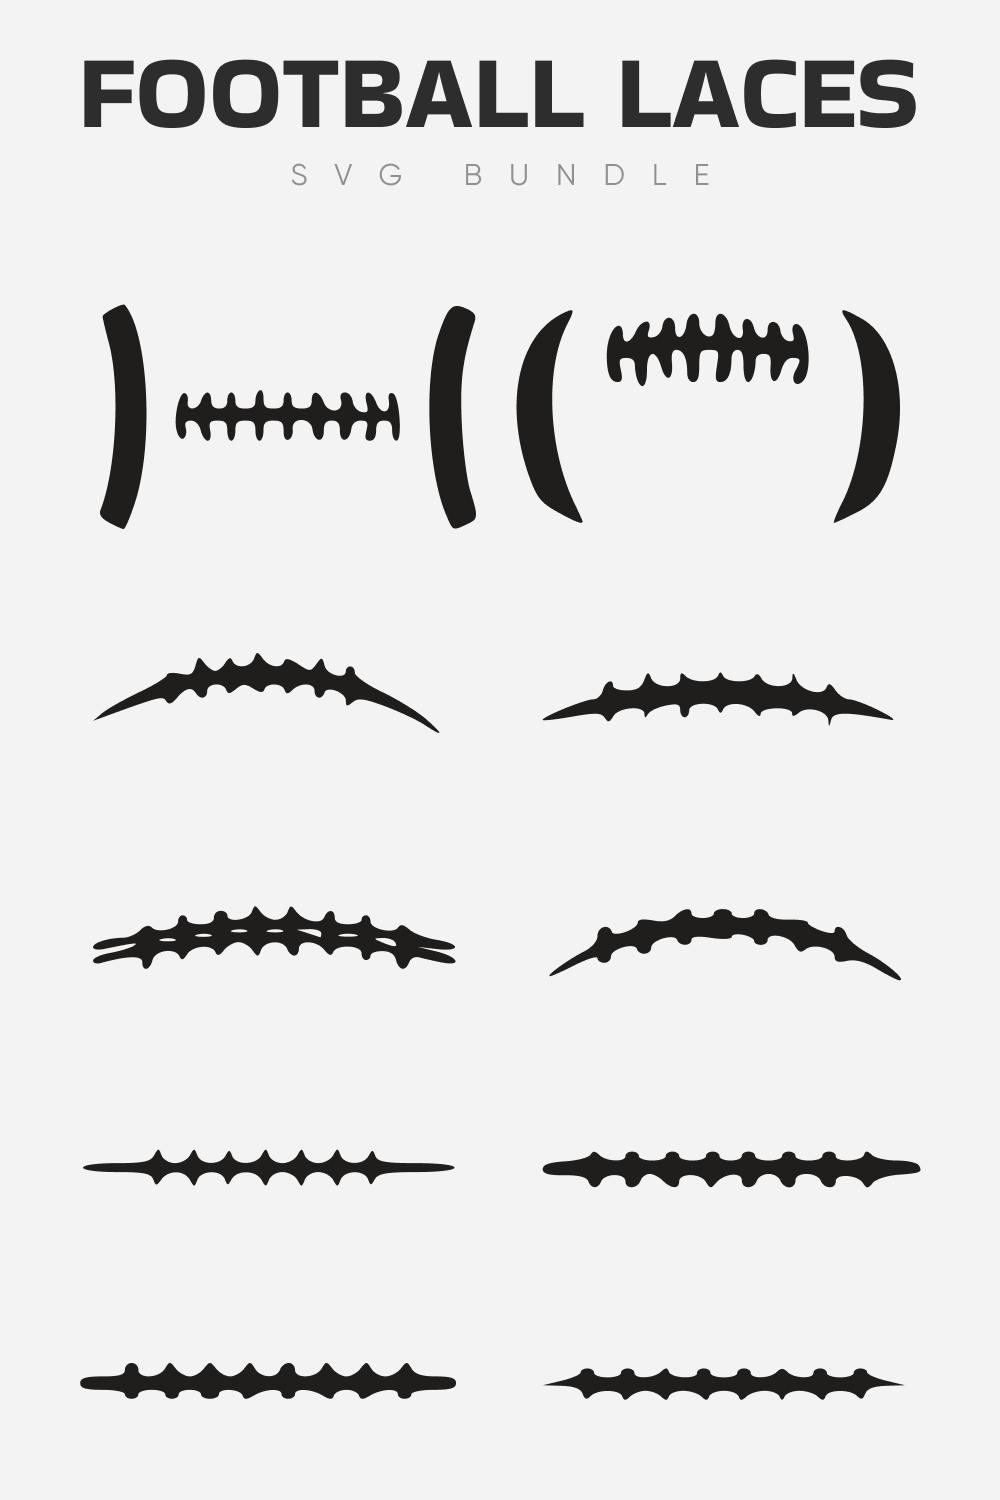 Football Laces SVG.